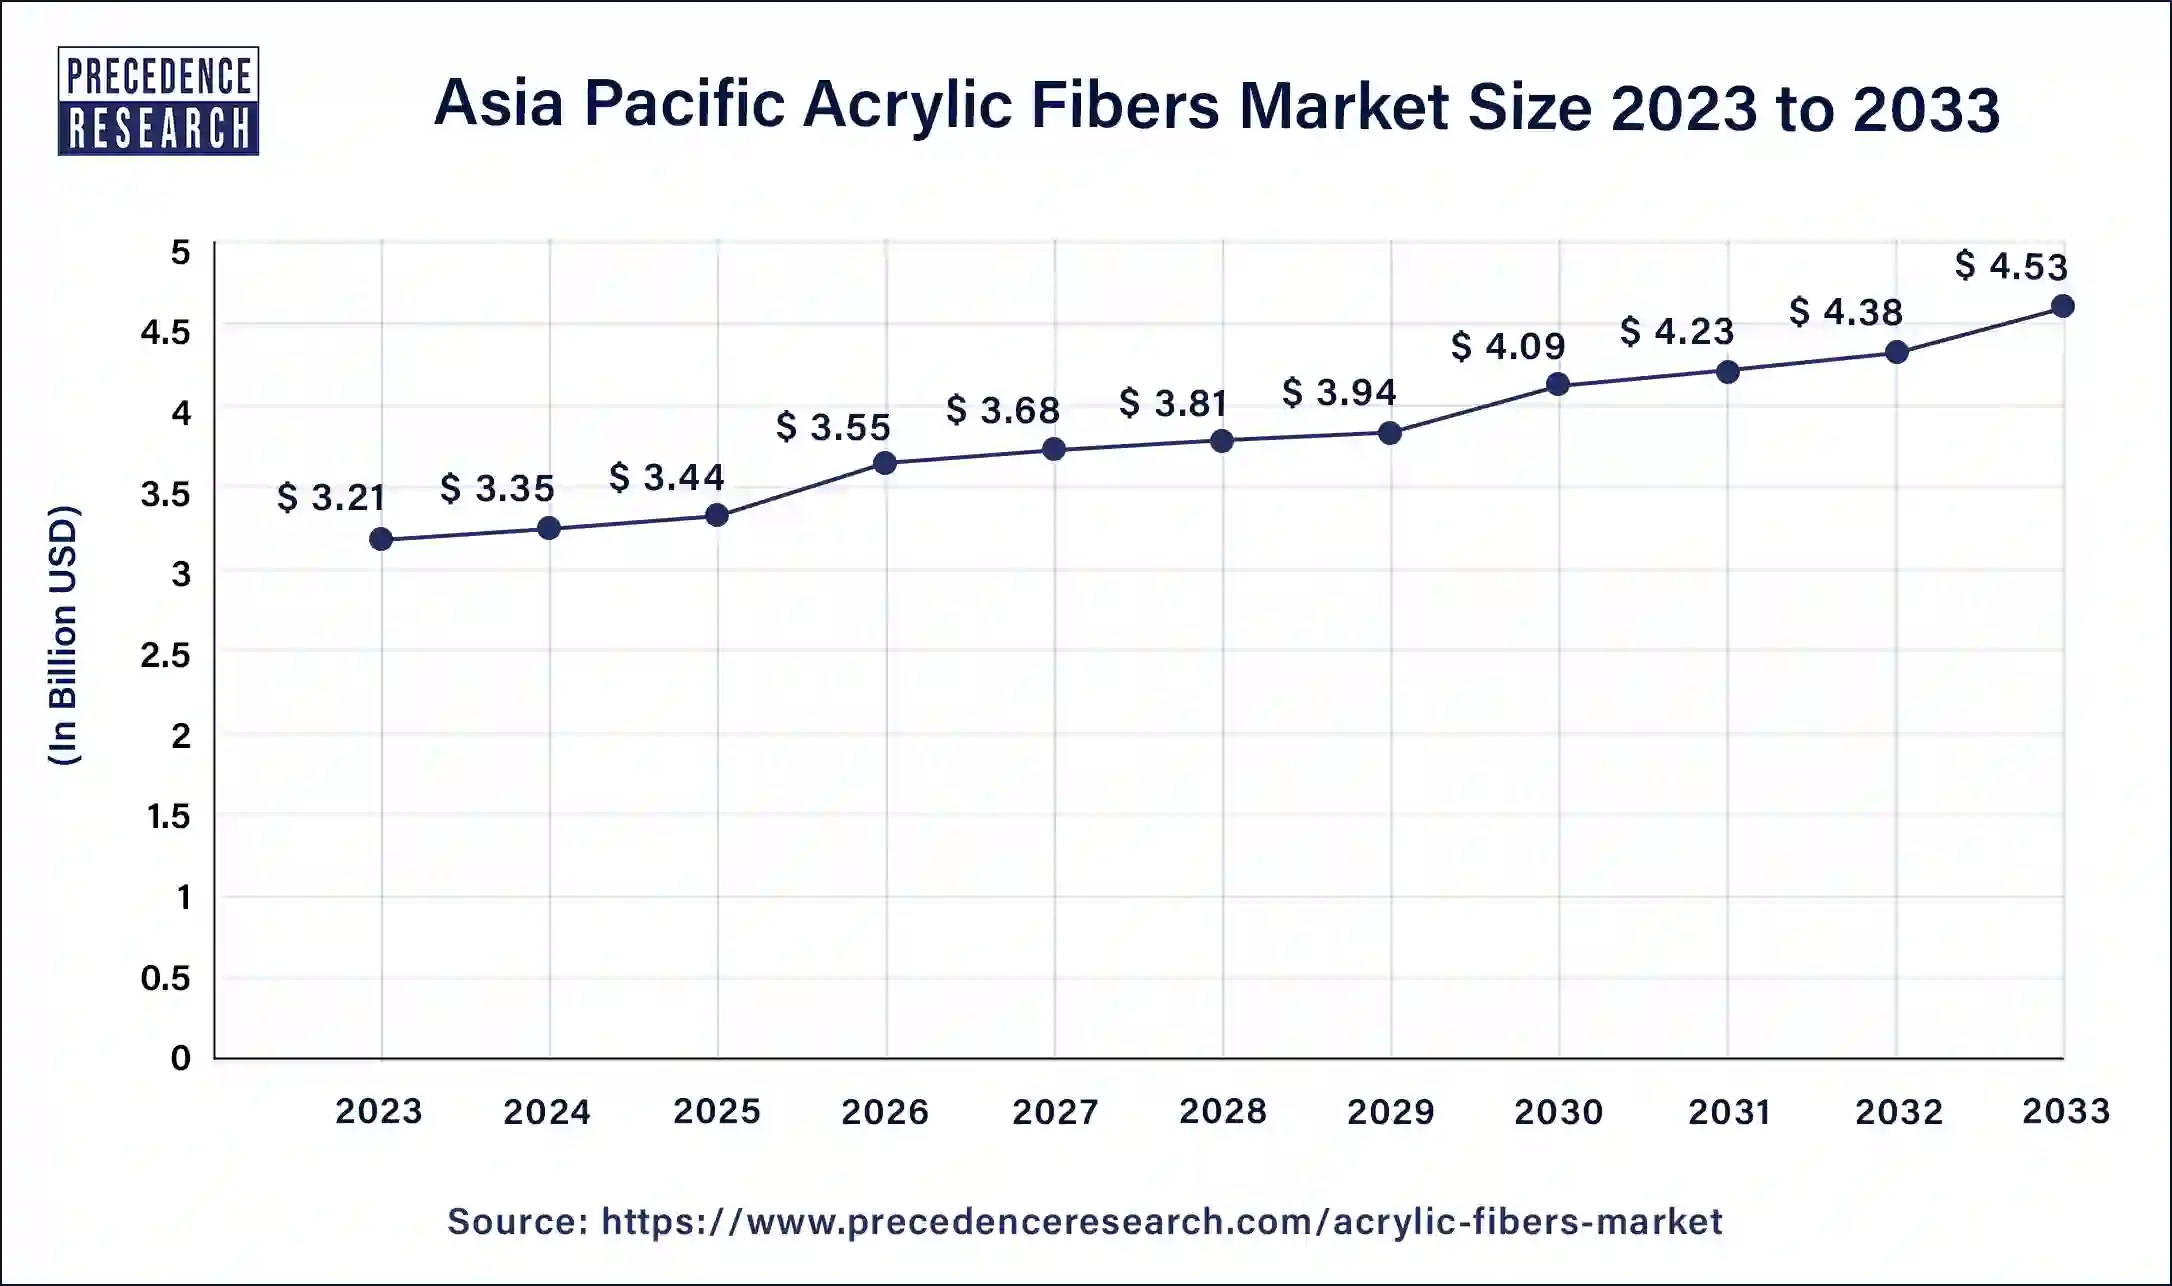 Asia Pacific Acrylic Fibers Market Size 2024 to 2033